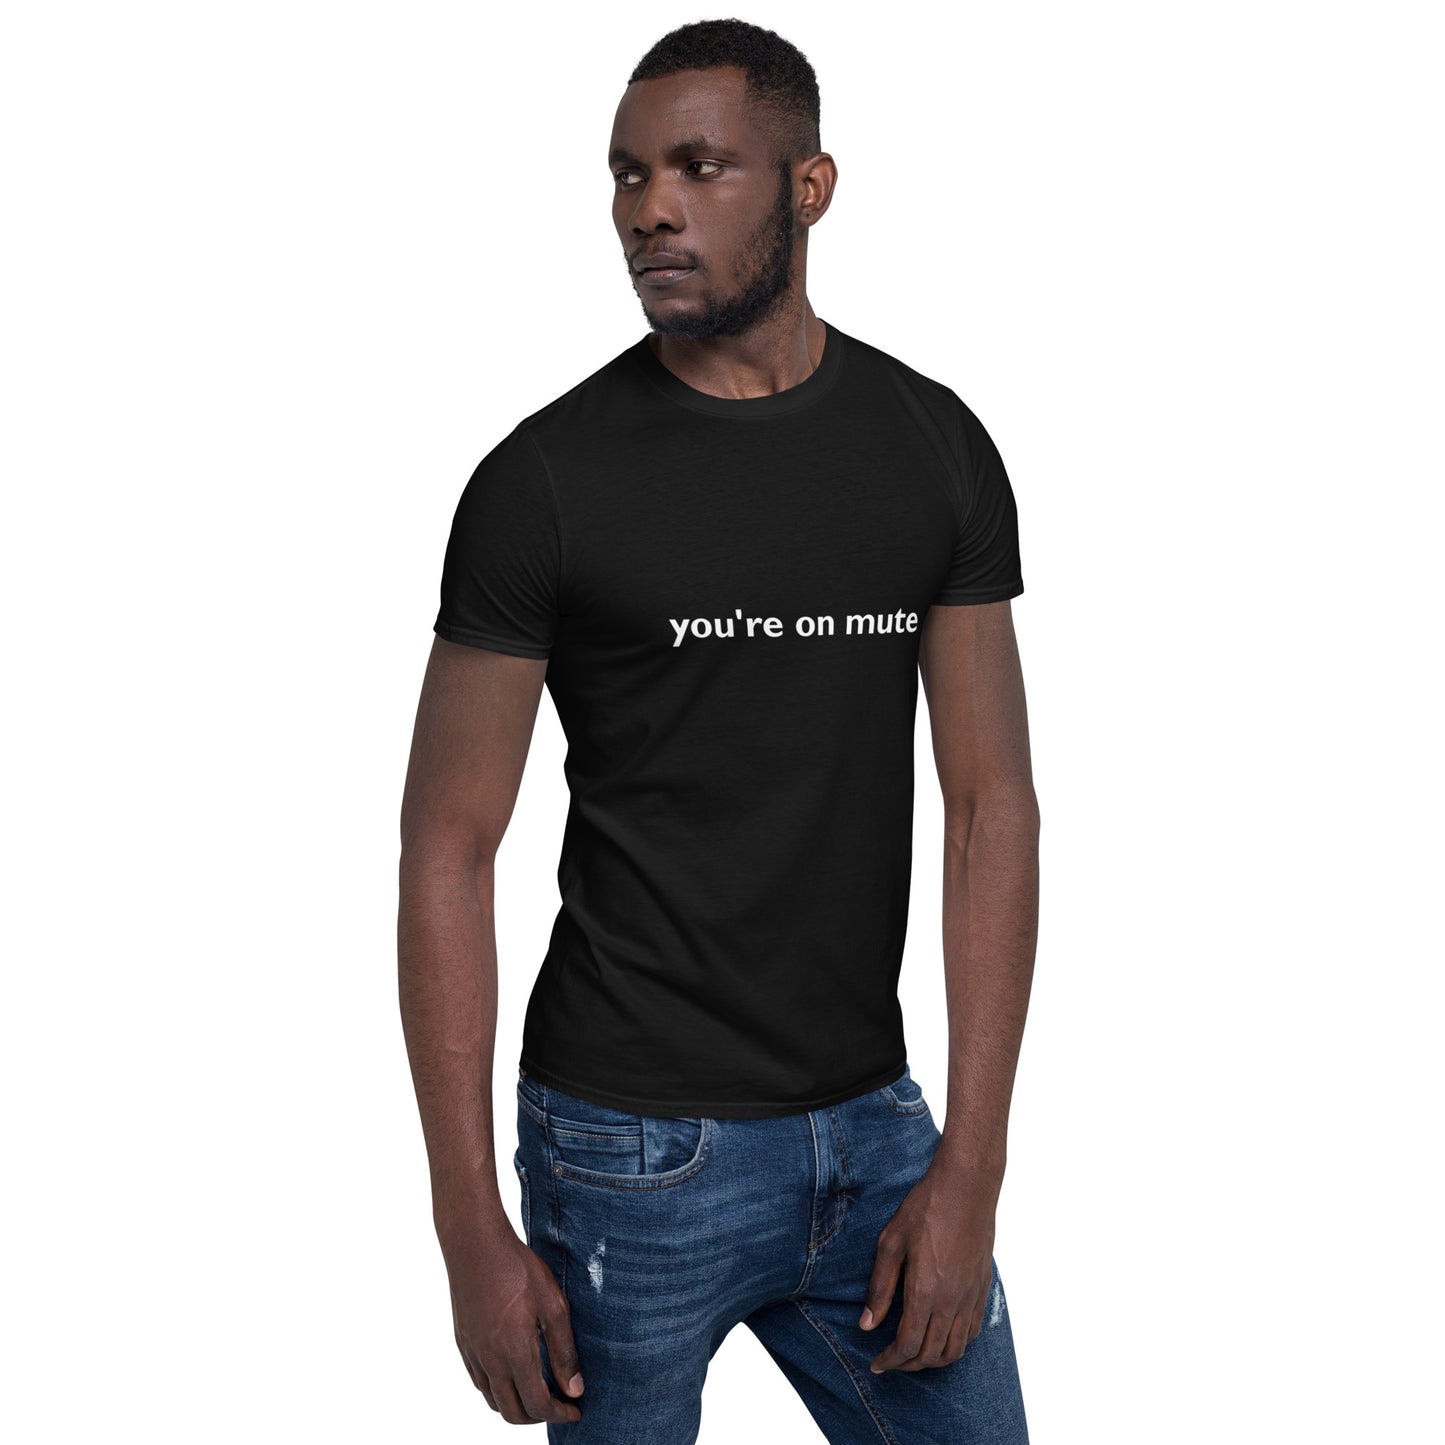 You're on Mute Unisex T-Shirt